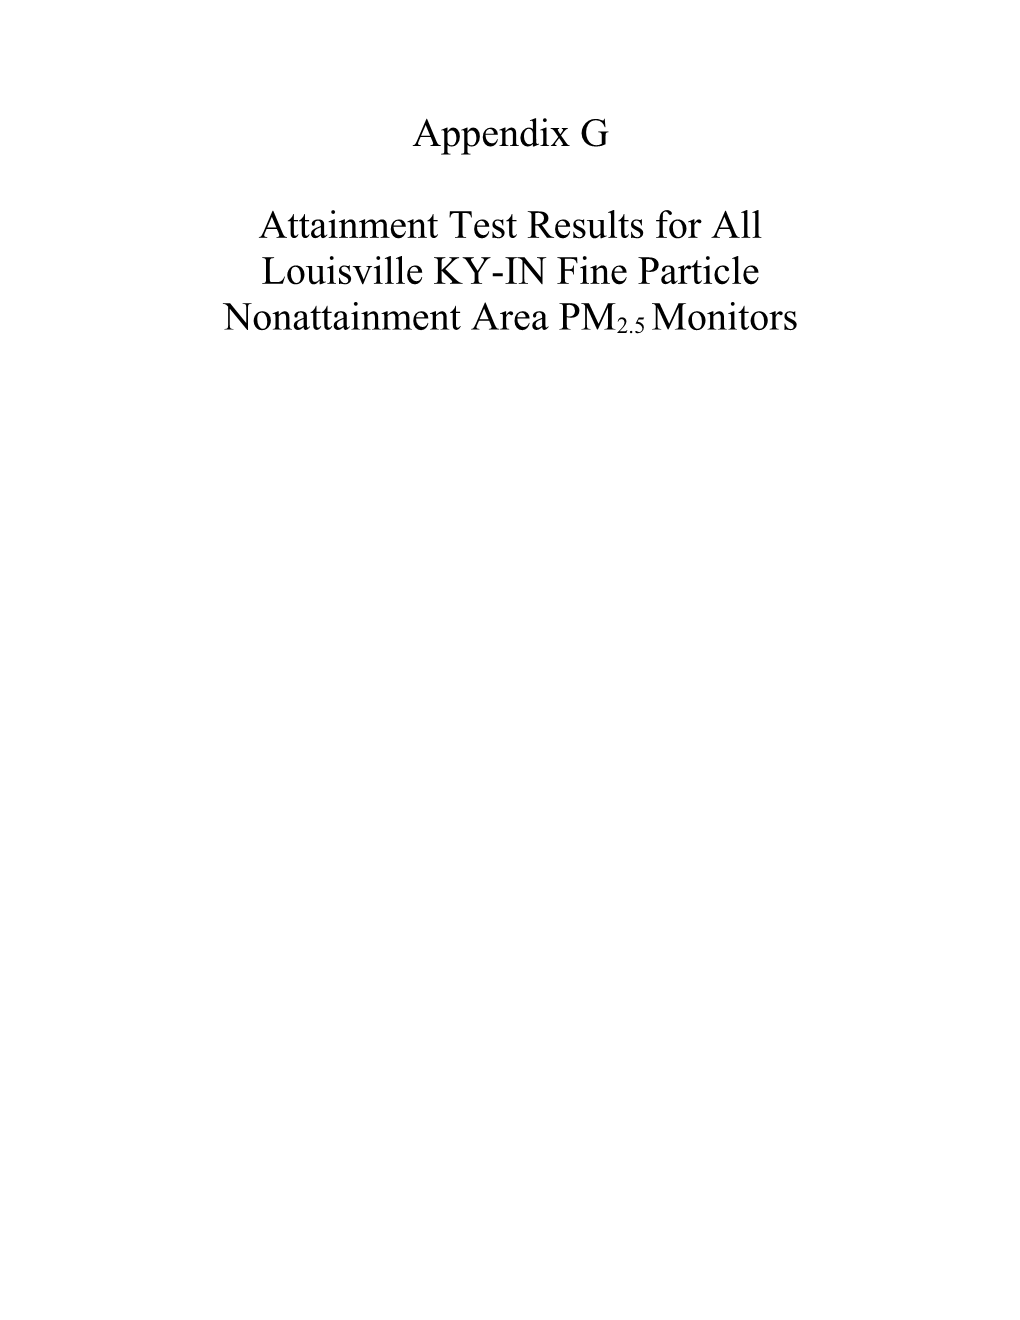 Attainment Test Results for All